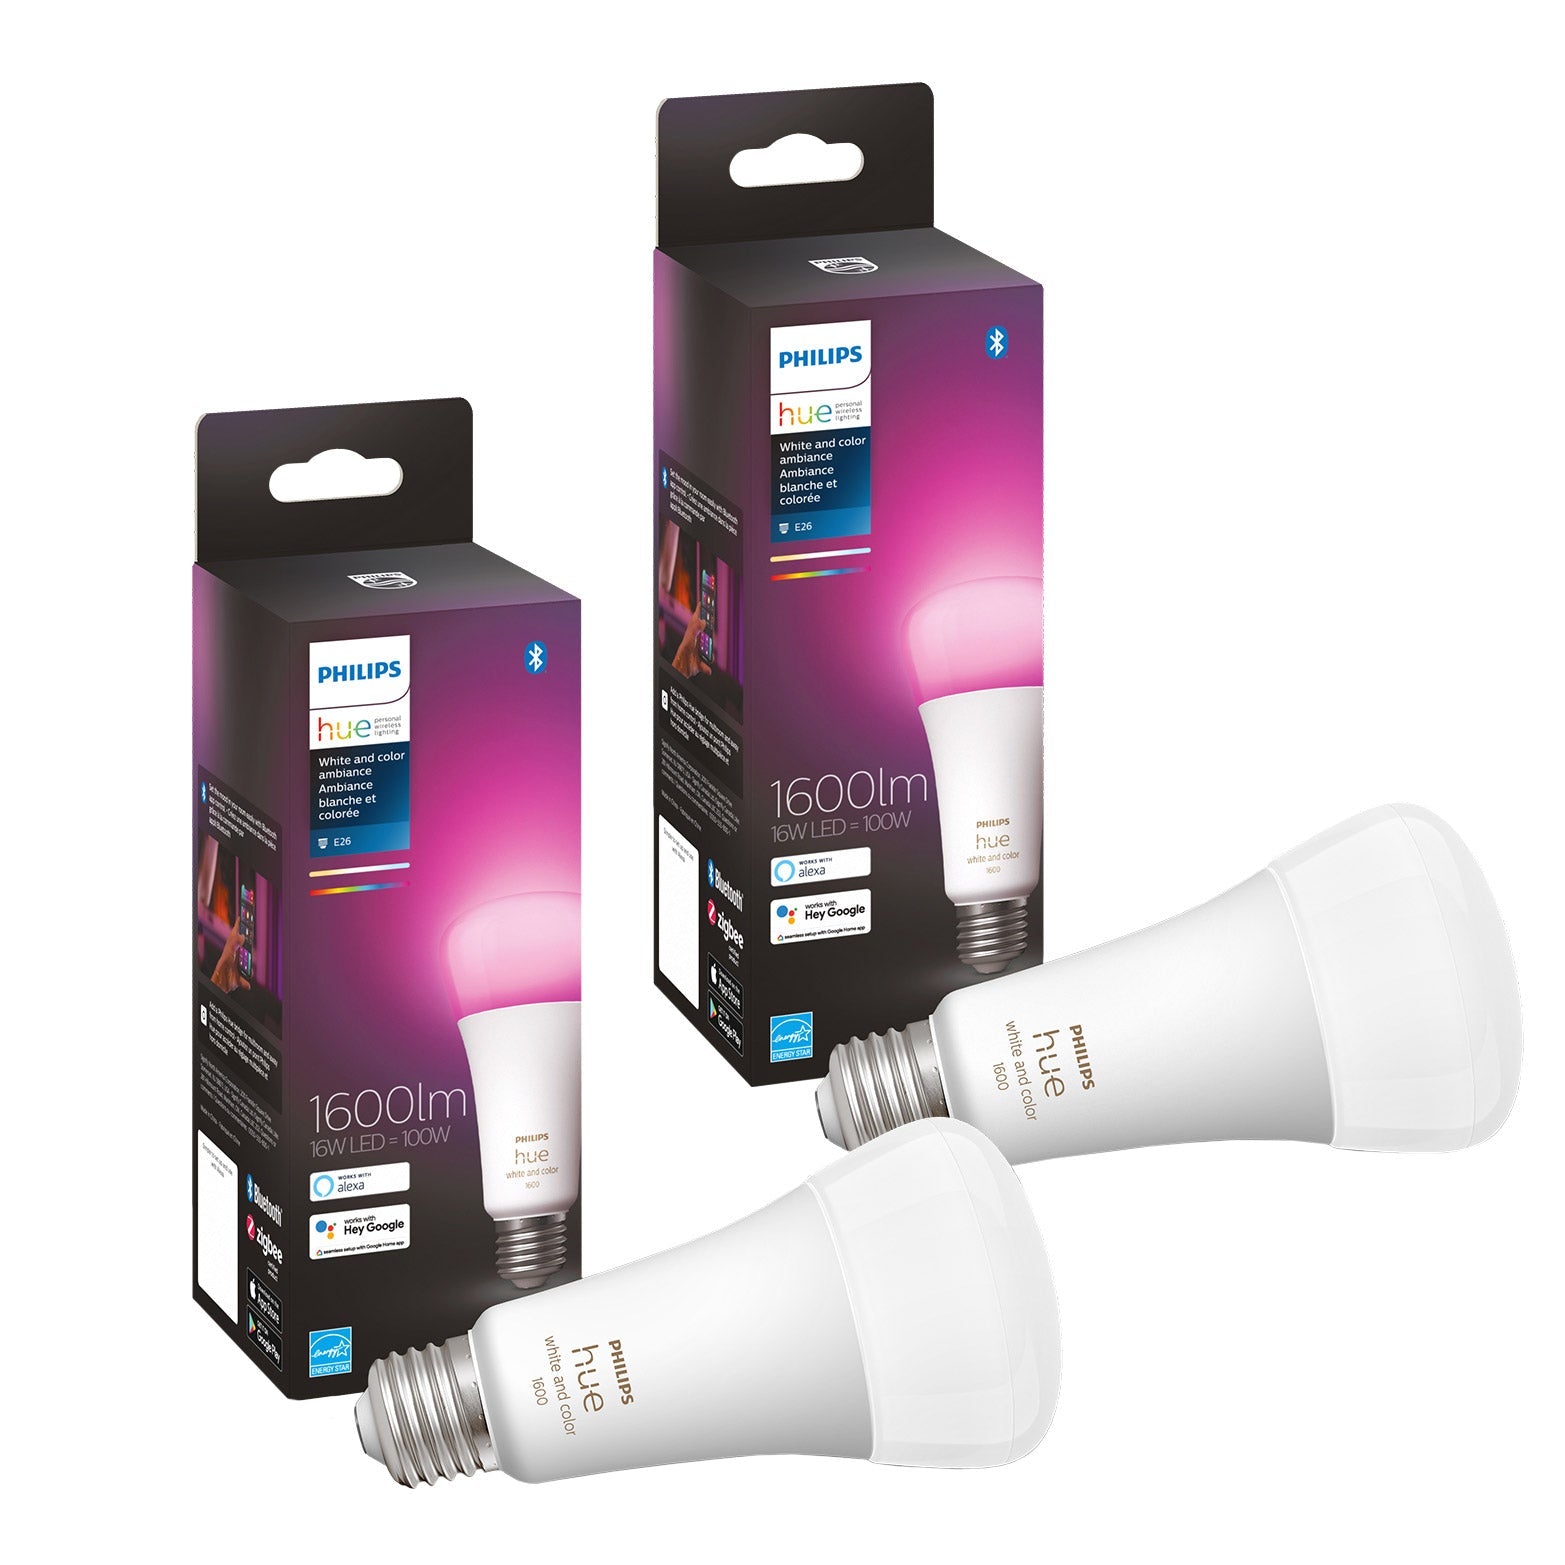 Hue 100W White and Color Ambiance A21 LED Bulbs 2-Pack